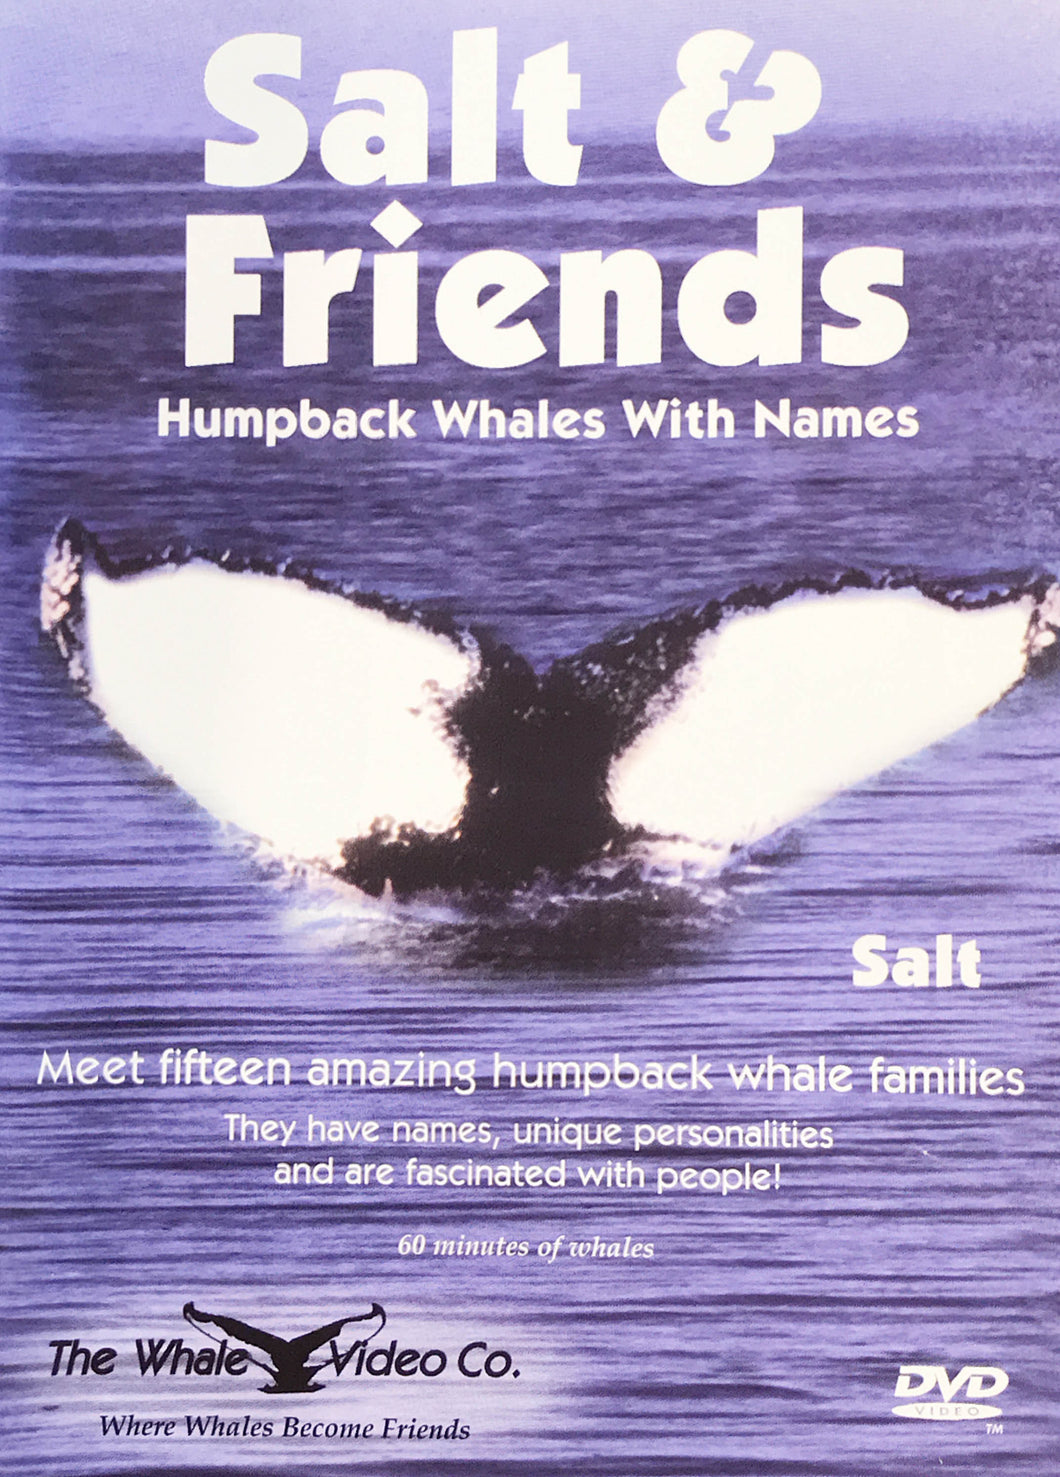 Salt & Friends: Humpback Whales with Names